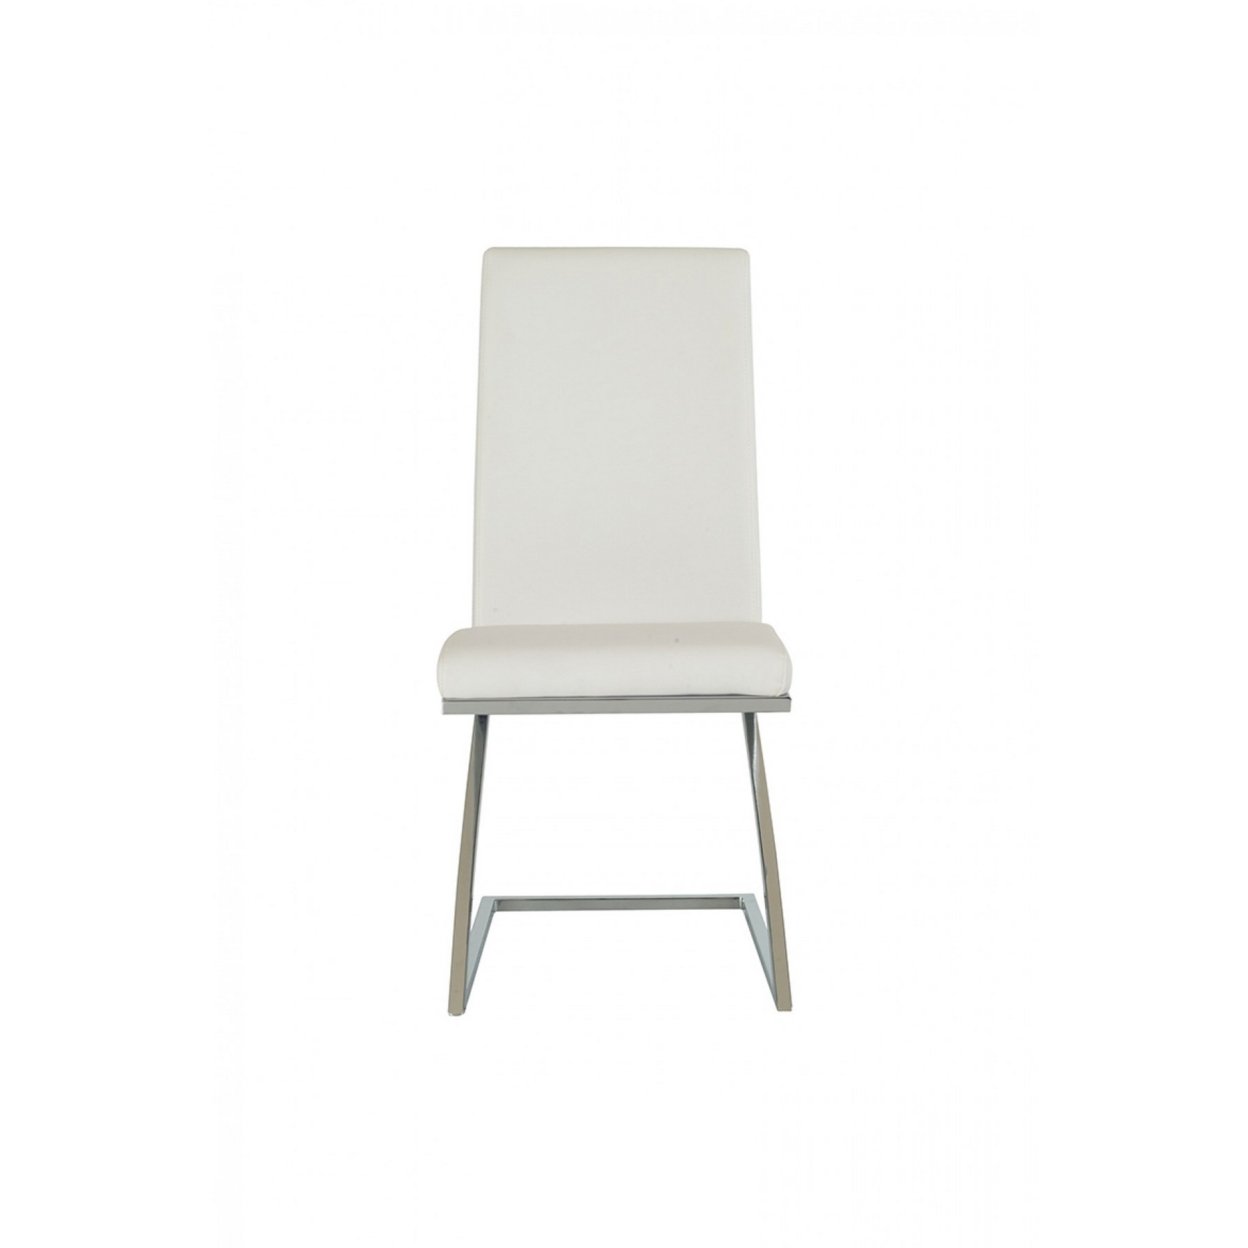 Leatherette Dining Chair With Z Shape Metal Base, Set Of 2, White And Chrome- Saltoro Sherpi